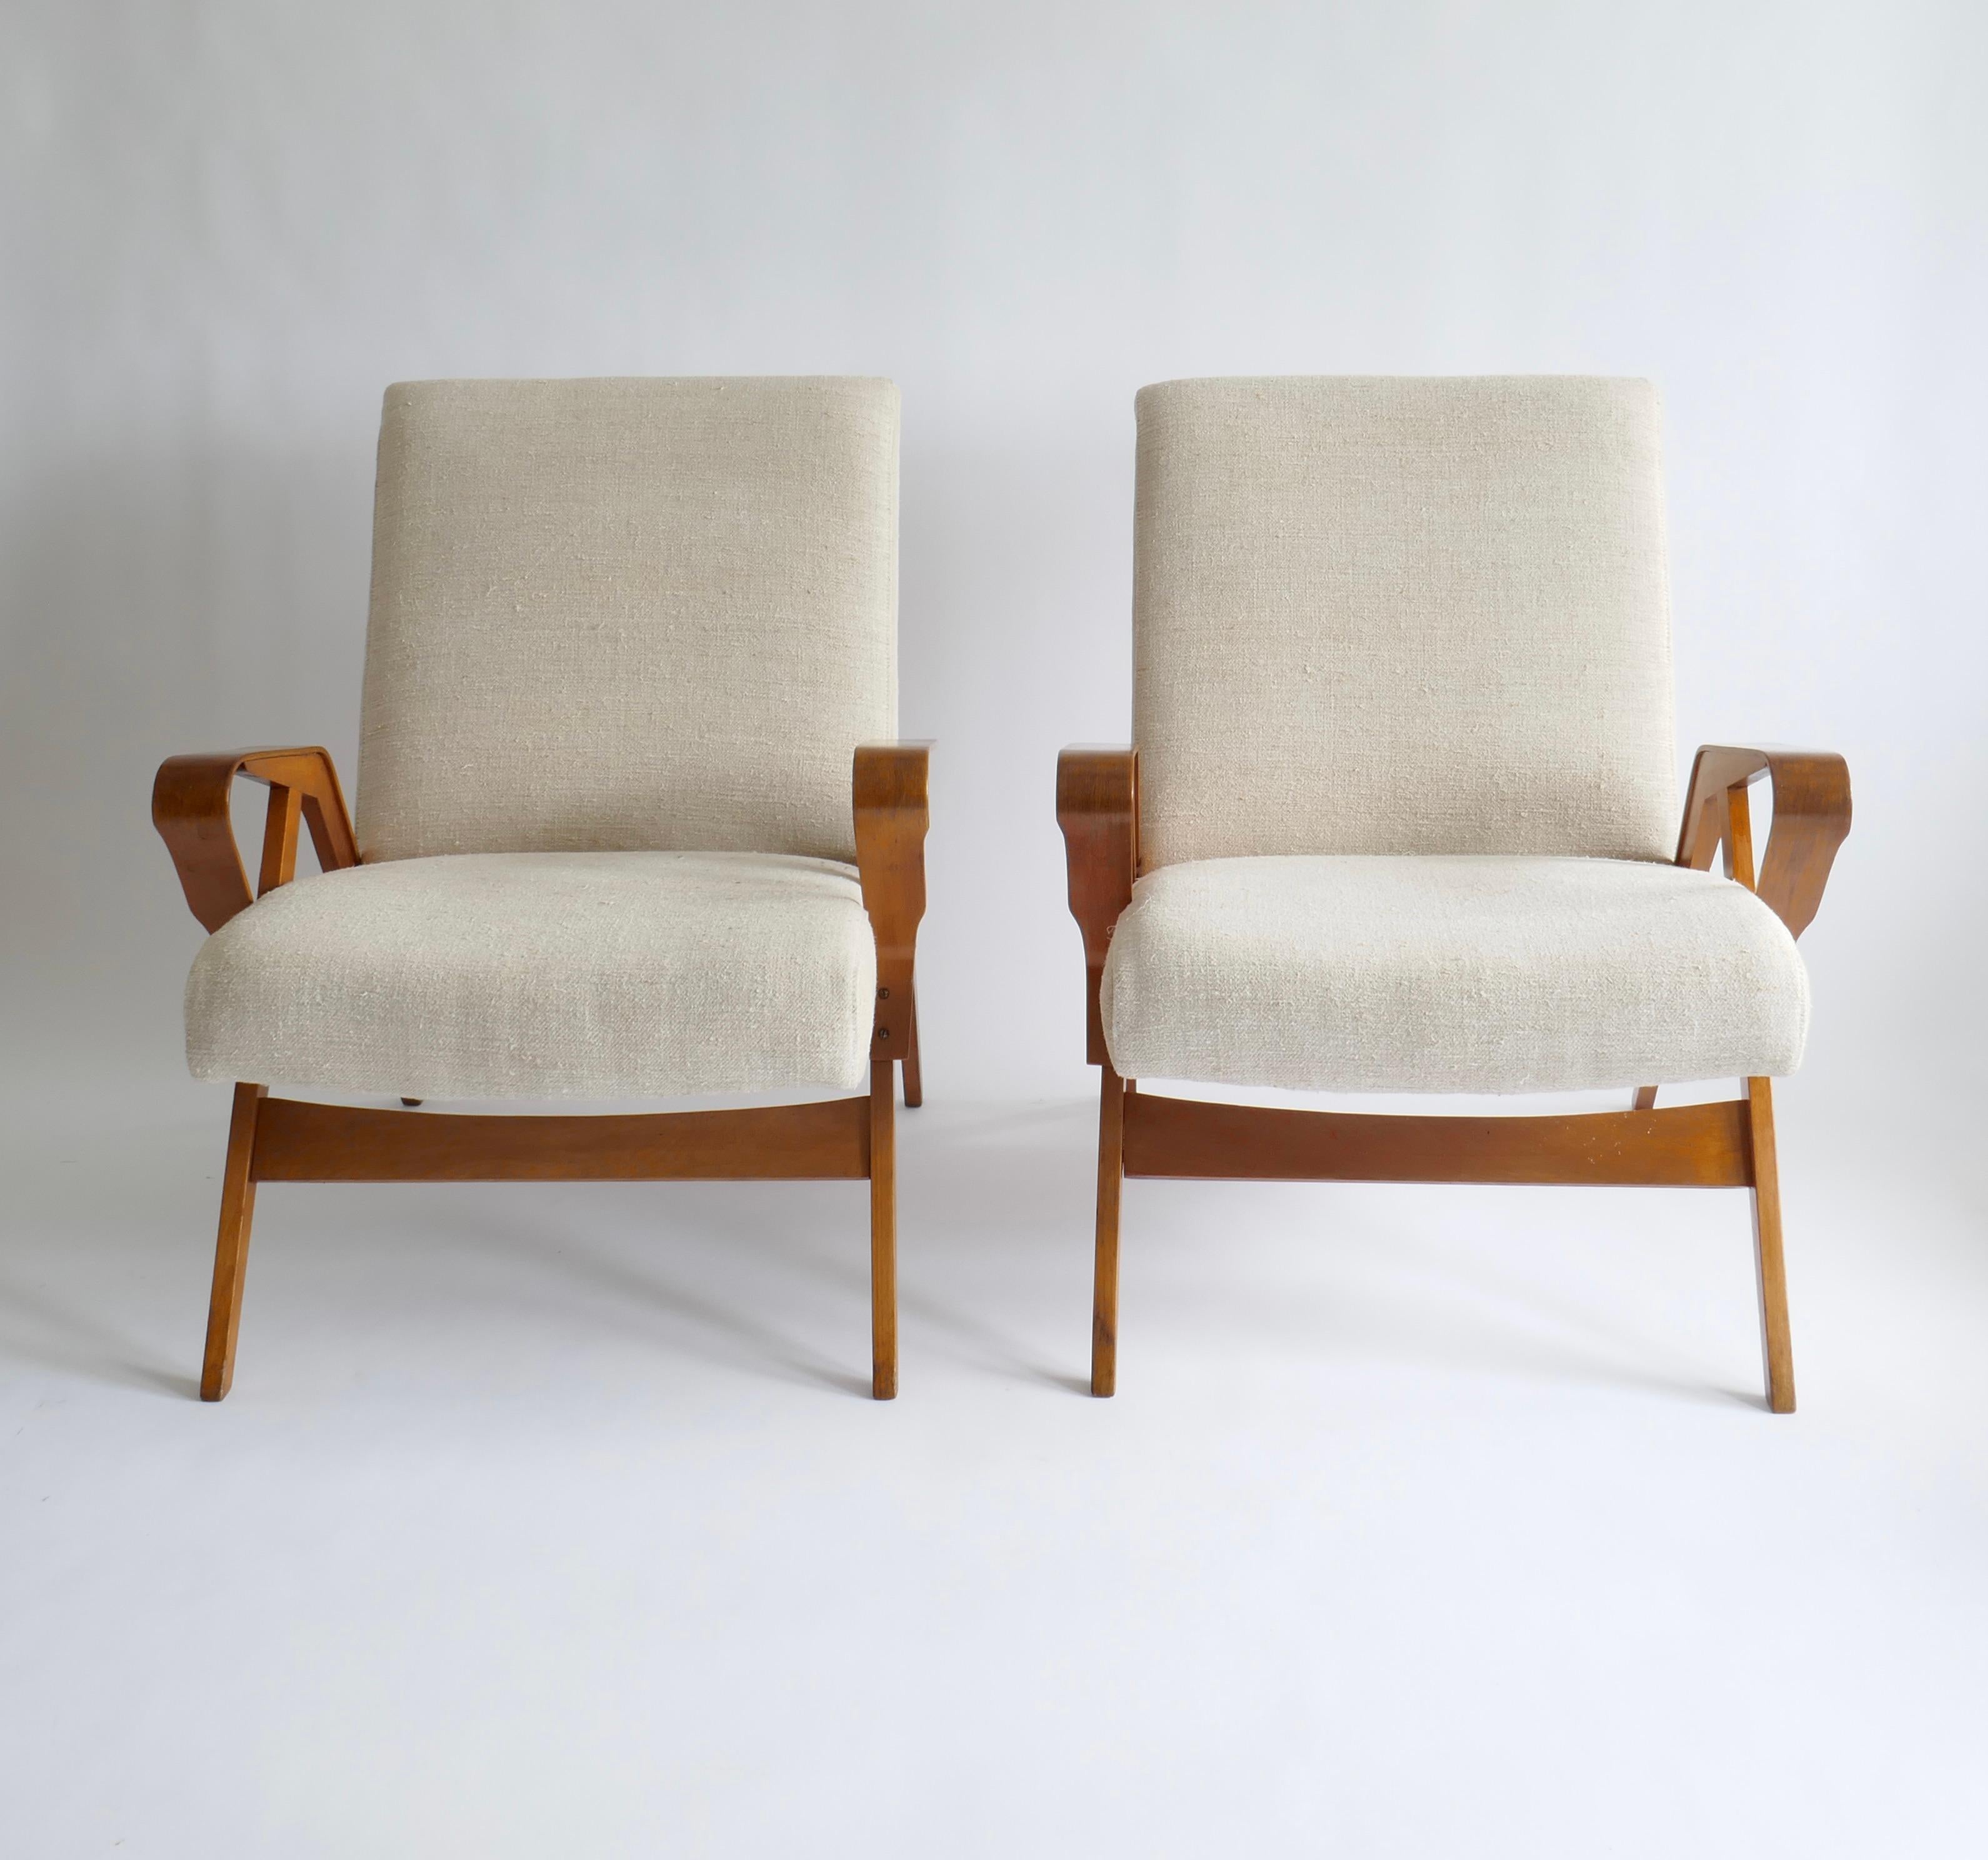 Mid-Century Modern Pair of Lounge Chairs Upholstered in off White Vintage Linen, 1960s